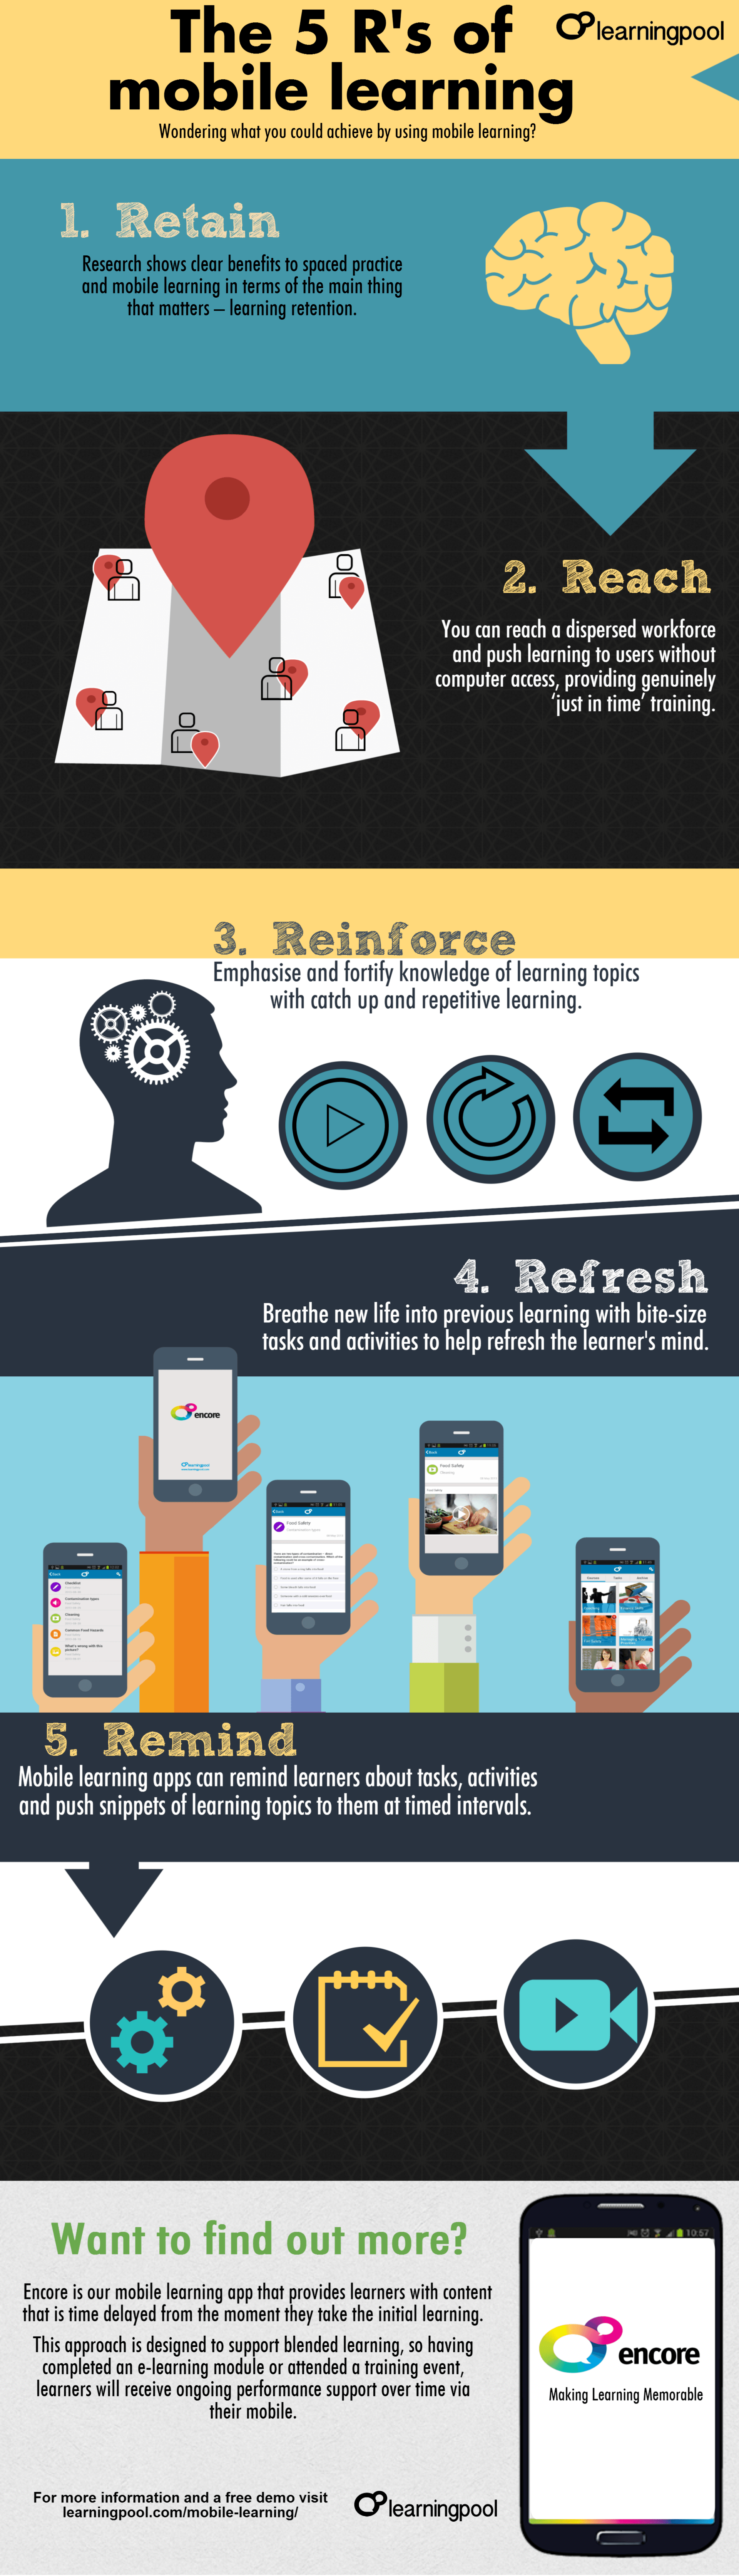 The 5 R's of Mobile Learning Infographic